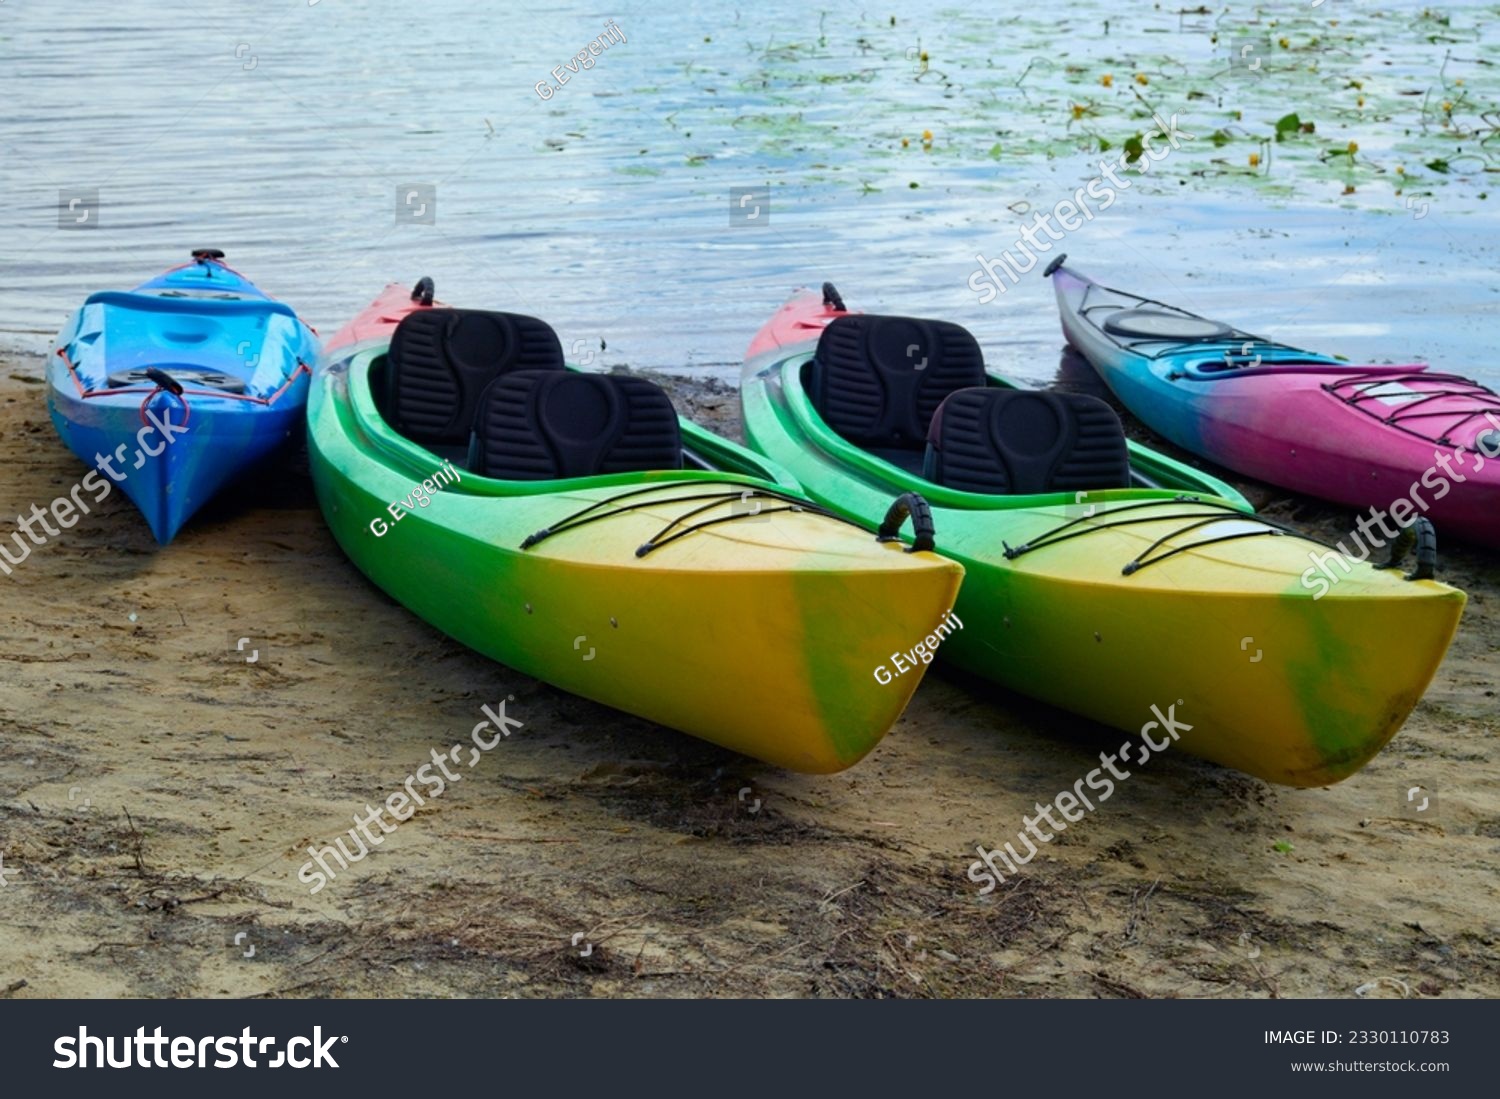 Landscape view of several colorful kayaks at the river shore. Boats on the city sandy beach, Obolon, Kyiv, Ukraine. Colorful kayaking equipment on a sandy beach. #2330110783